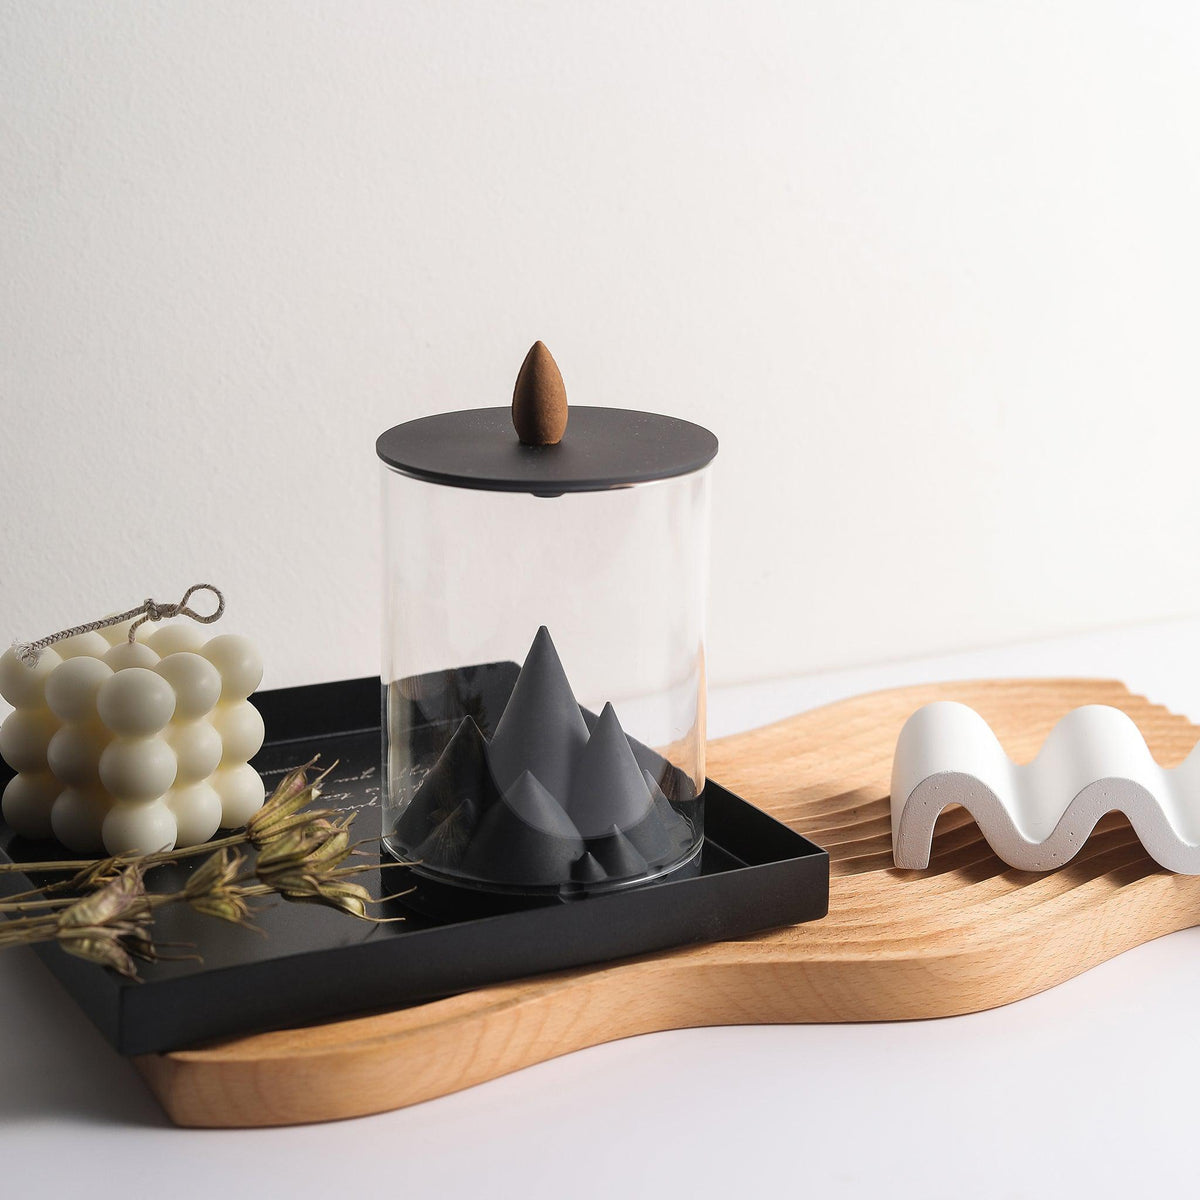 Karst Incense Burner in a Home Setting with Candles and Wooden Tray